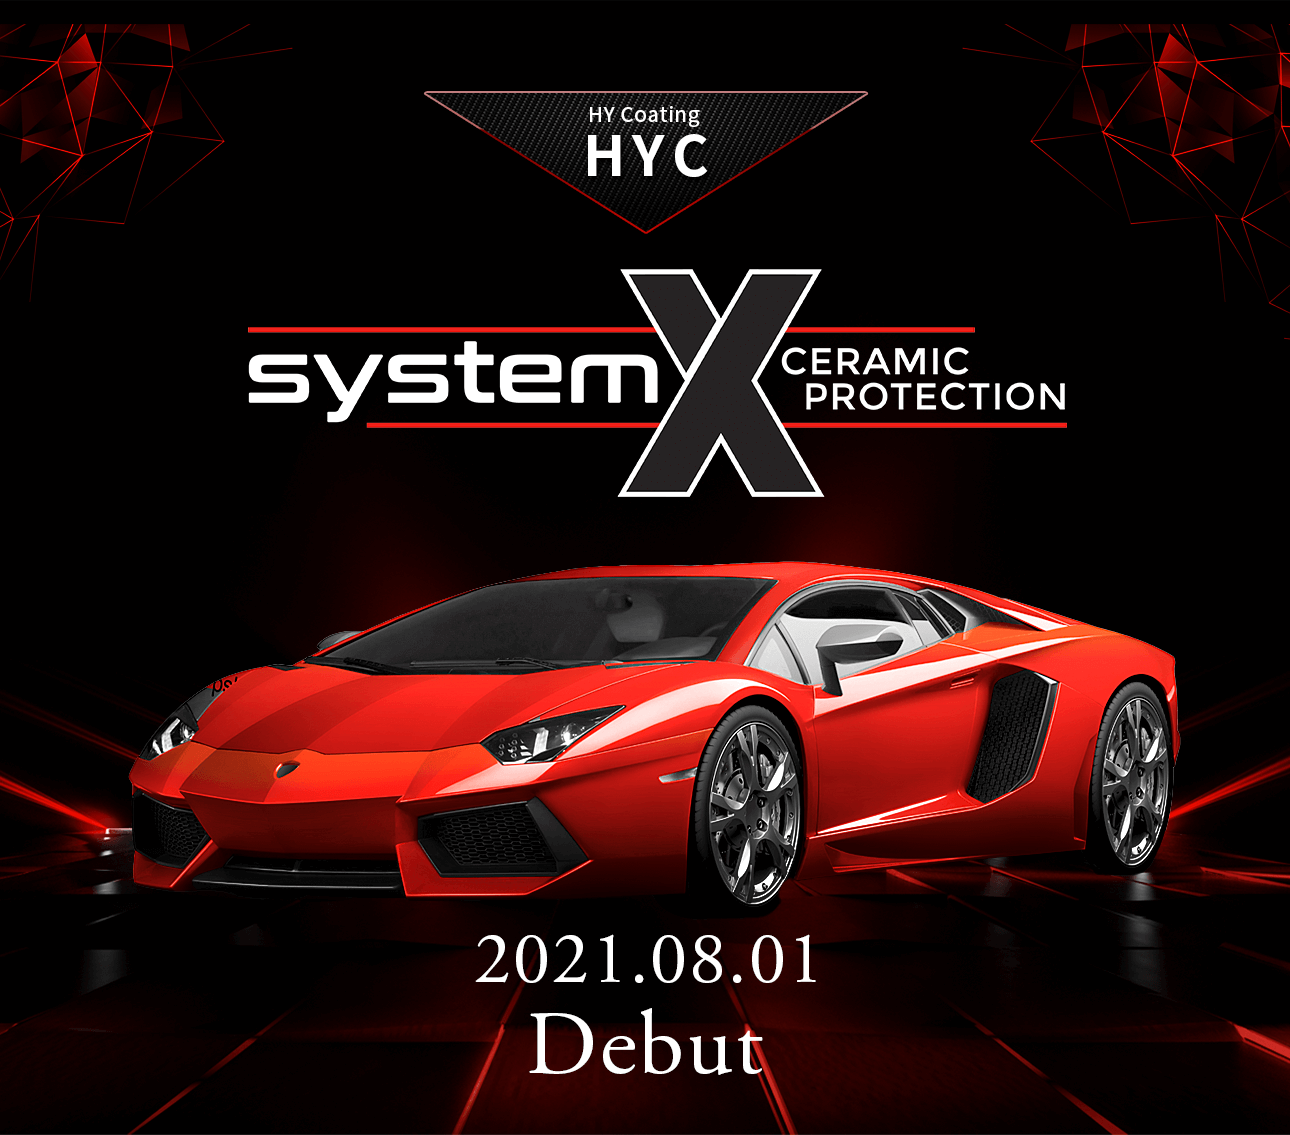 HY Coating systemX CERAMIC PROTECTION 2021.08.01 Debut